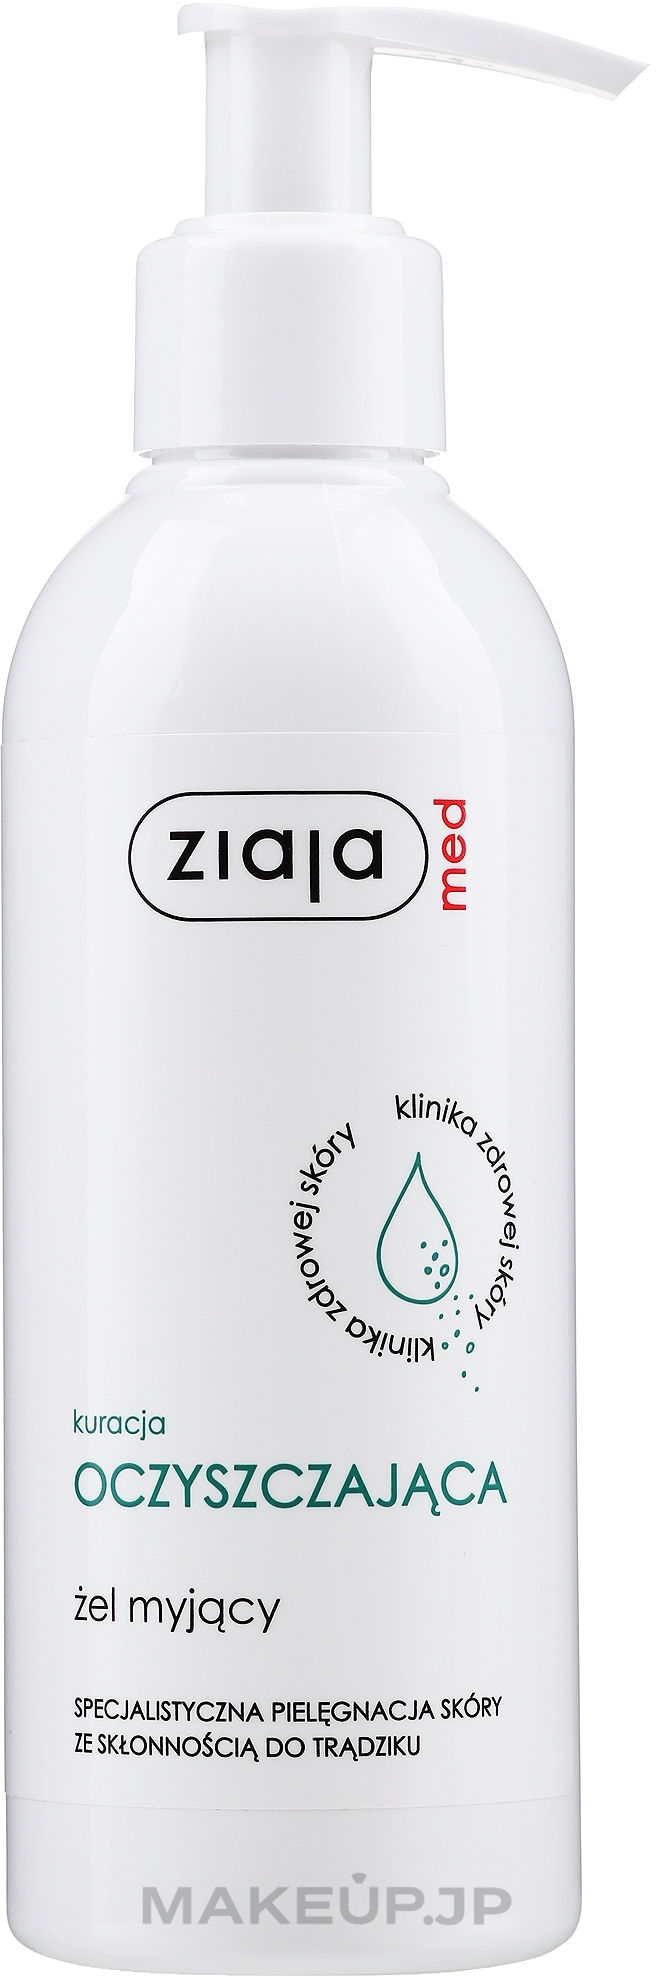 Antibacterial Cleansing Gel for Teens and Adults - Ziaja Med Cleansing Gel Antibacterial For Teens & Adults — photo 200 ml